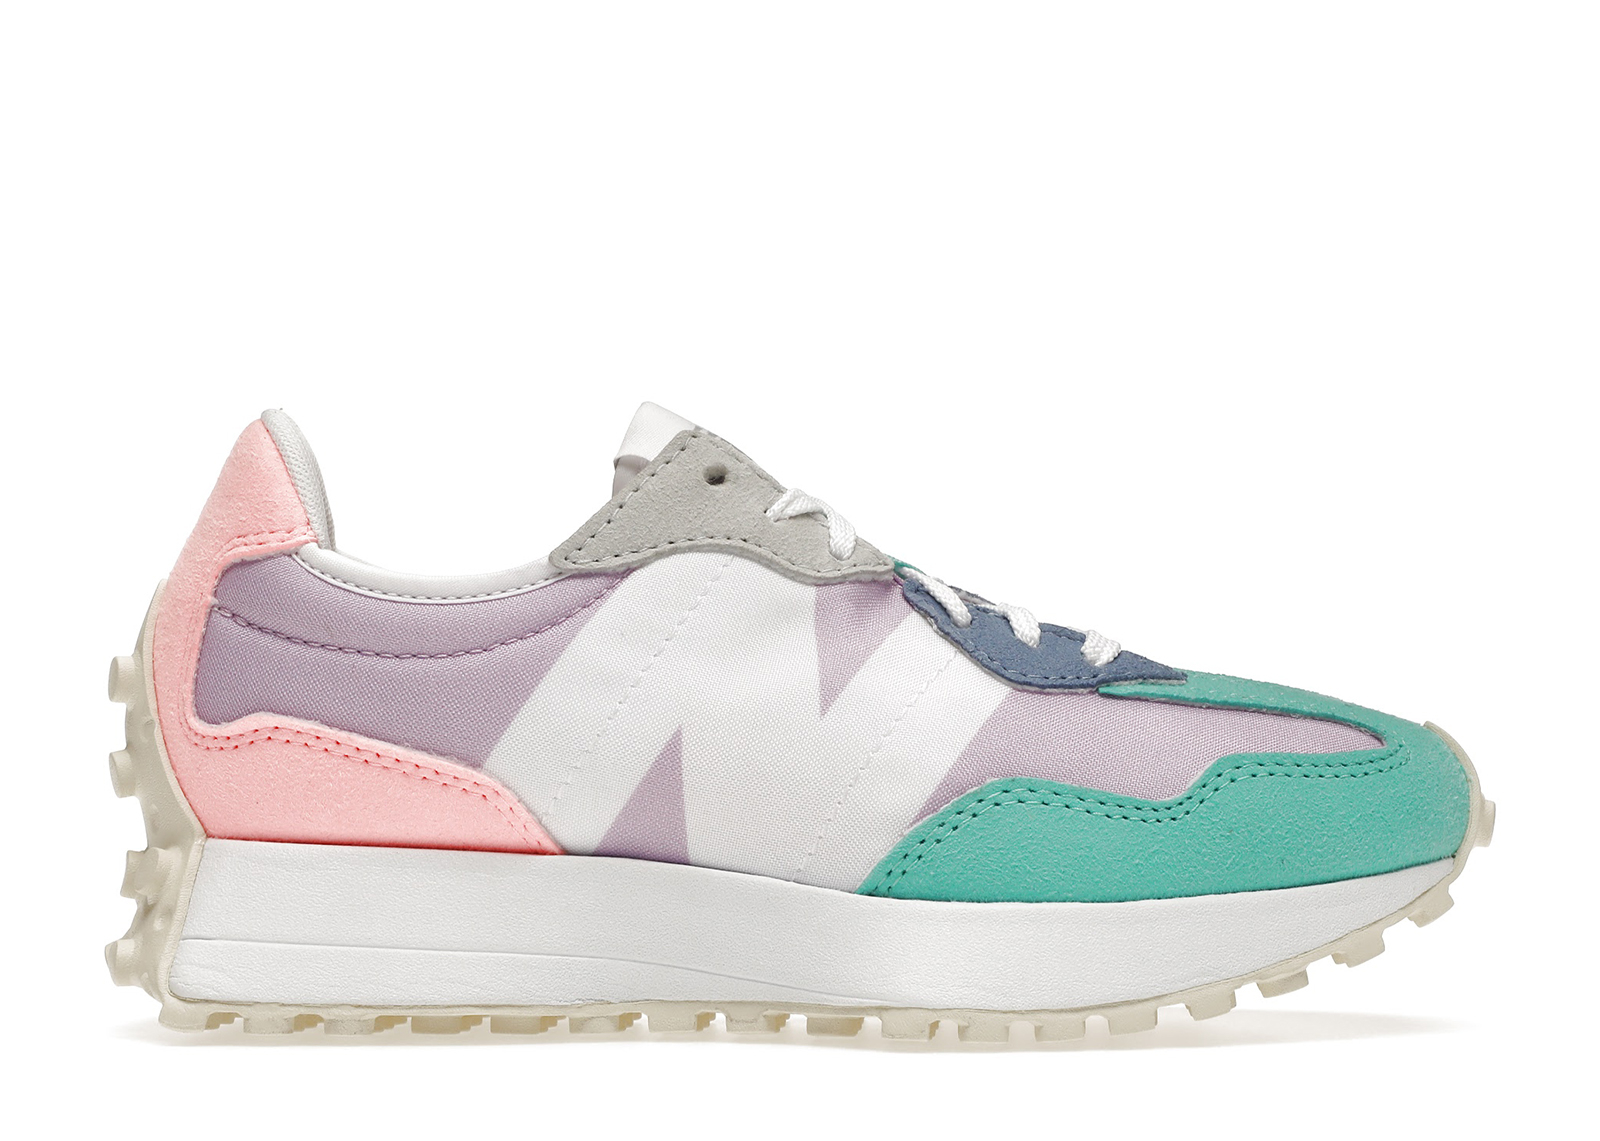 Buy New Balance 327 Shoes & Deadstock Sneakers